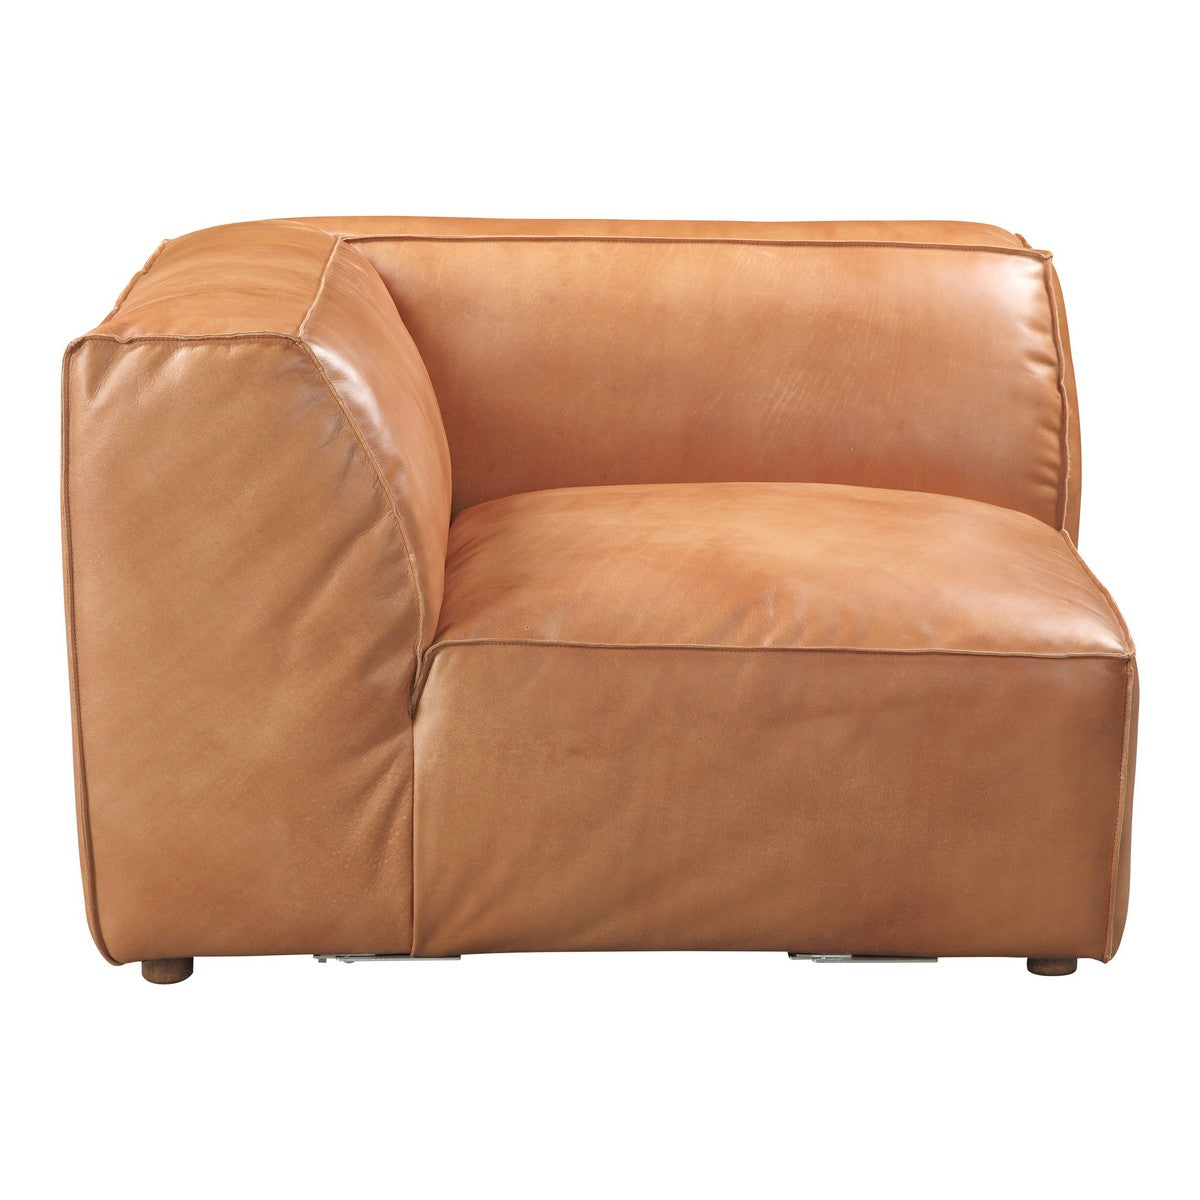 Moe's Home Collection Luxe Corner Chair Tan - QN-1021-40 - Moe's Home Collection - Corner Chairs - Minimal And Modern - 1